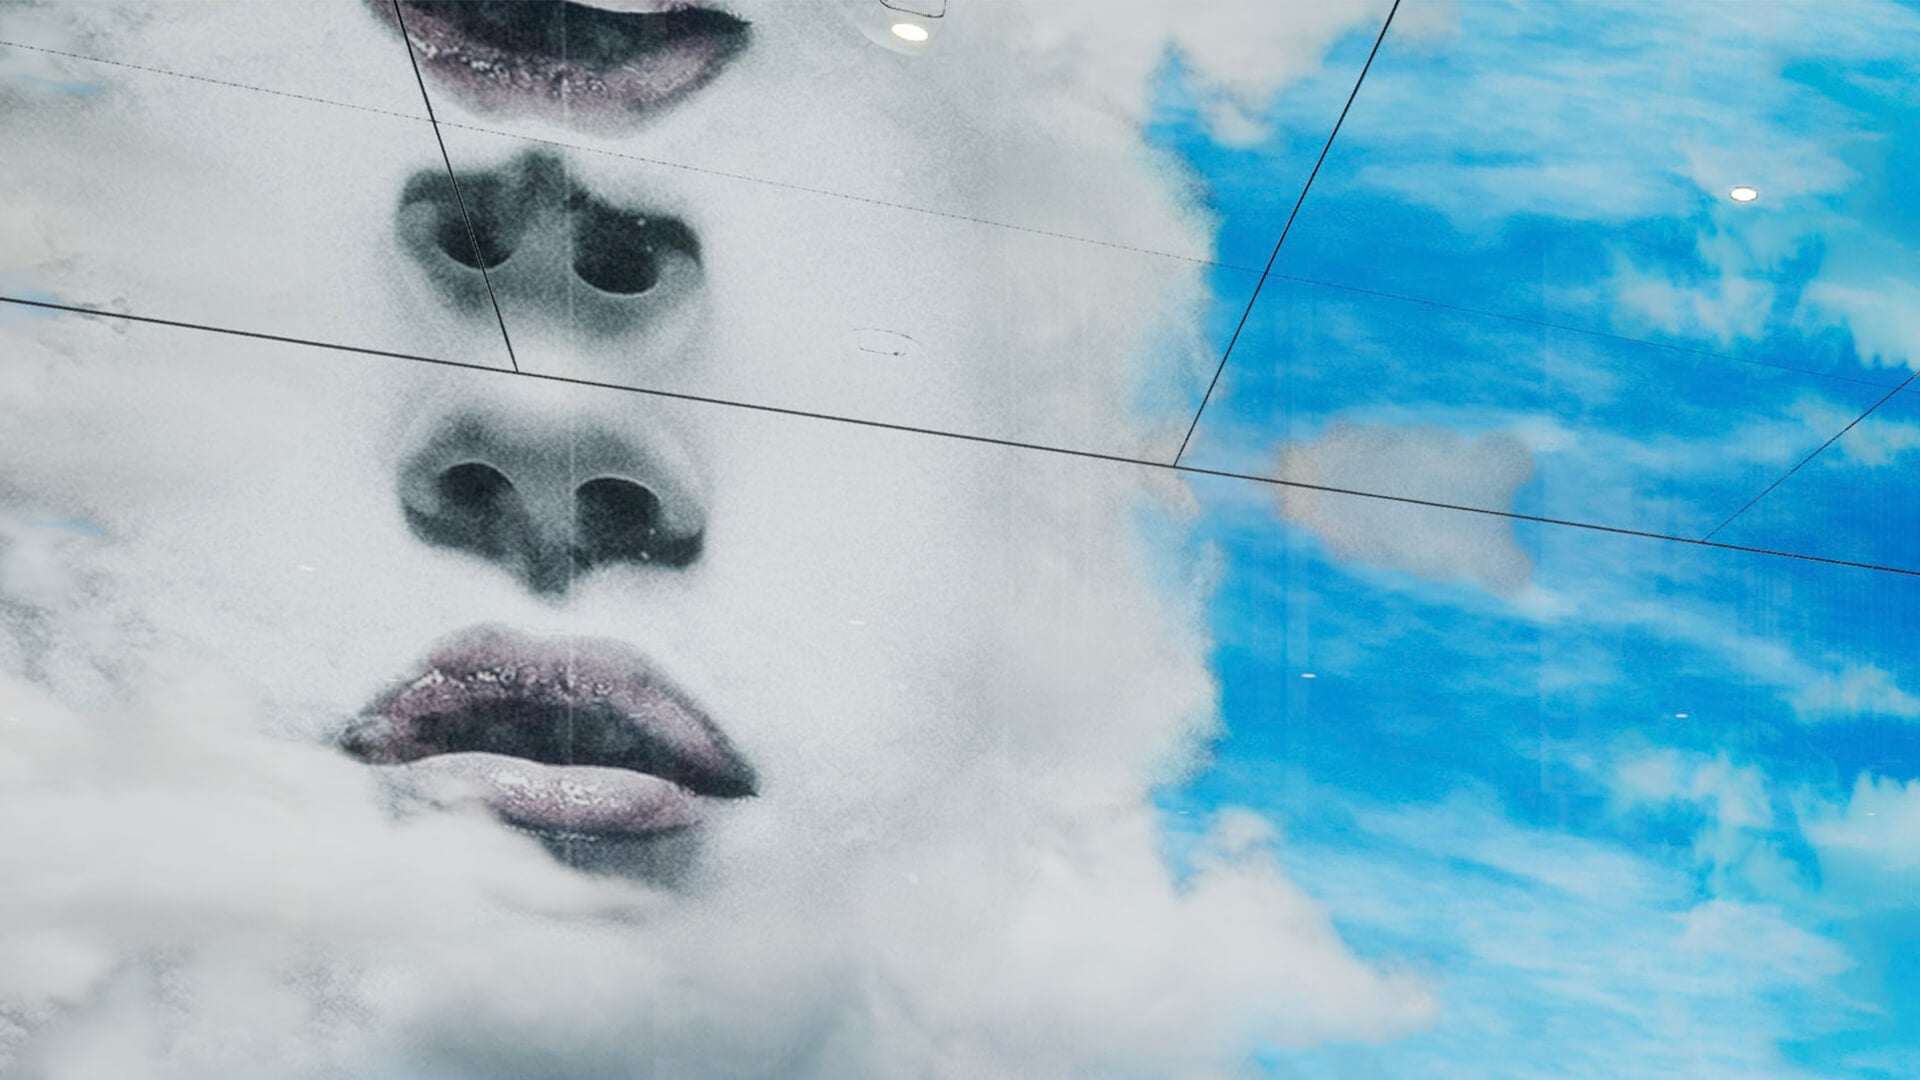 A striking digital art facade merges a woman's features with clouds, blending her face seamlessly with the sky.